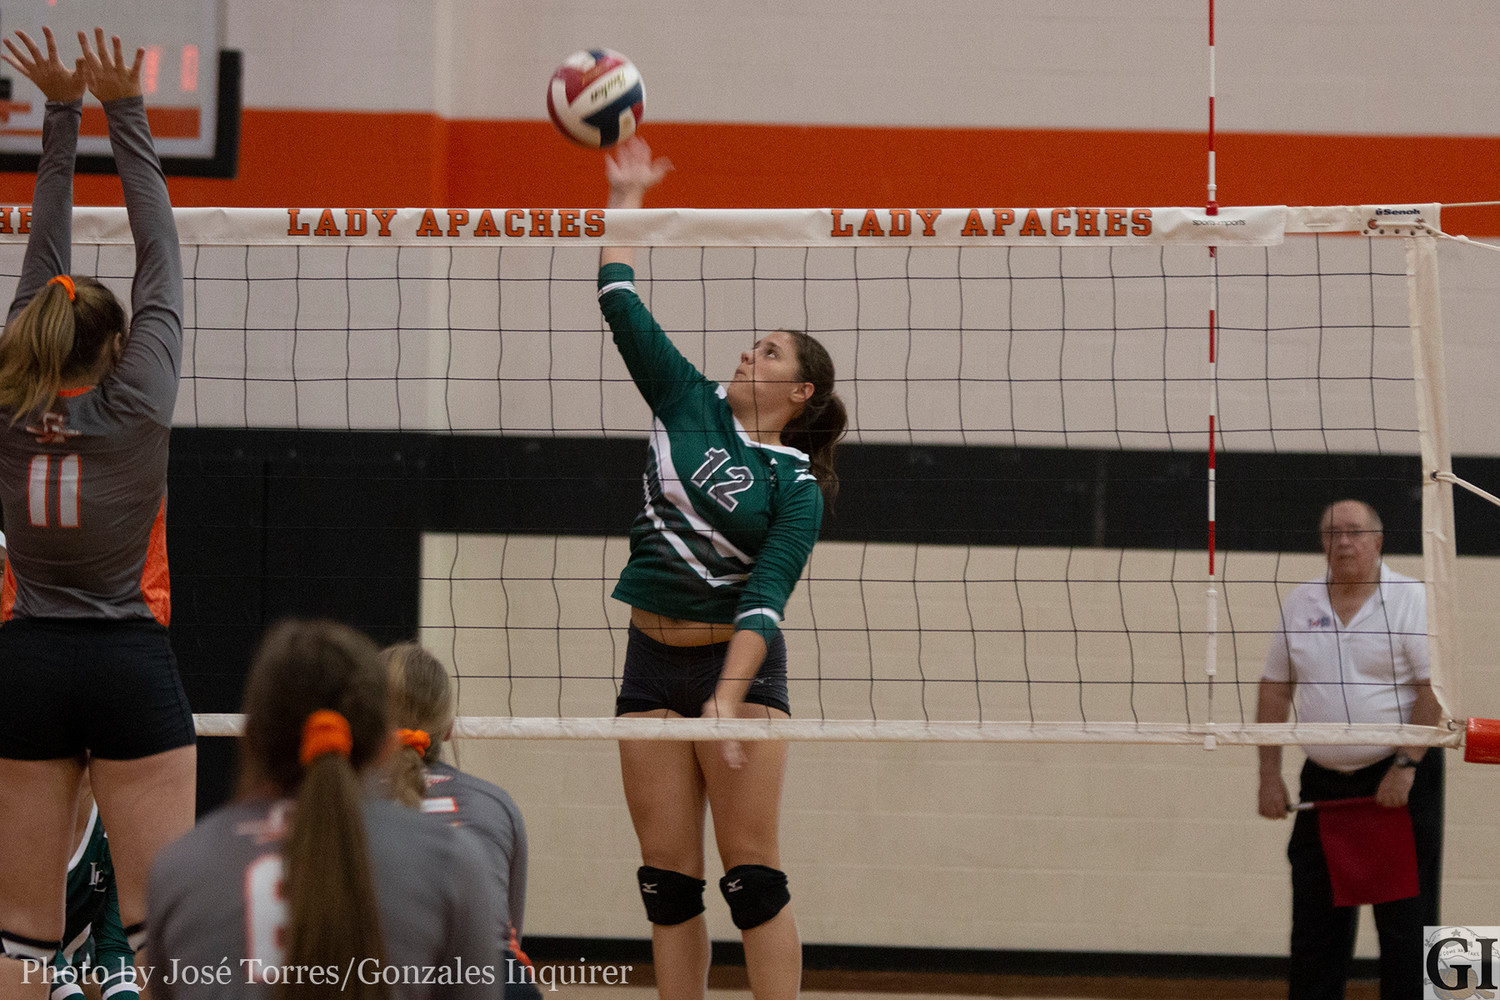 Luling had a strong start to the game, but could not defend Gonzales’ attacks in the second and third sets in their loss to the hosts. Gonzales would win (25-22, 25-14, 25-16).